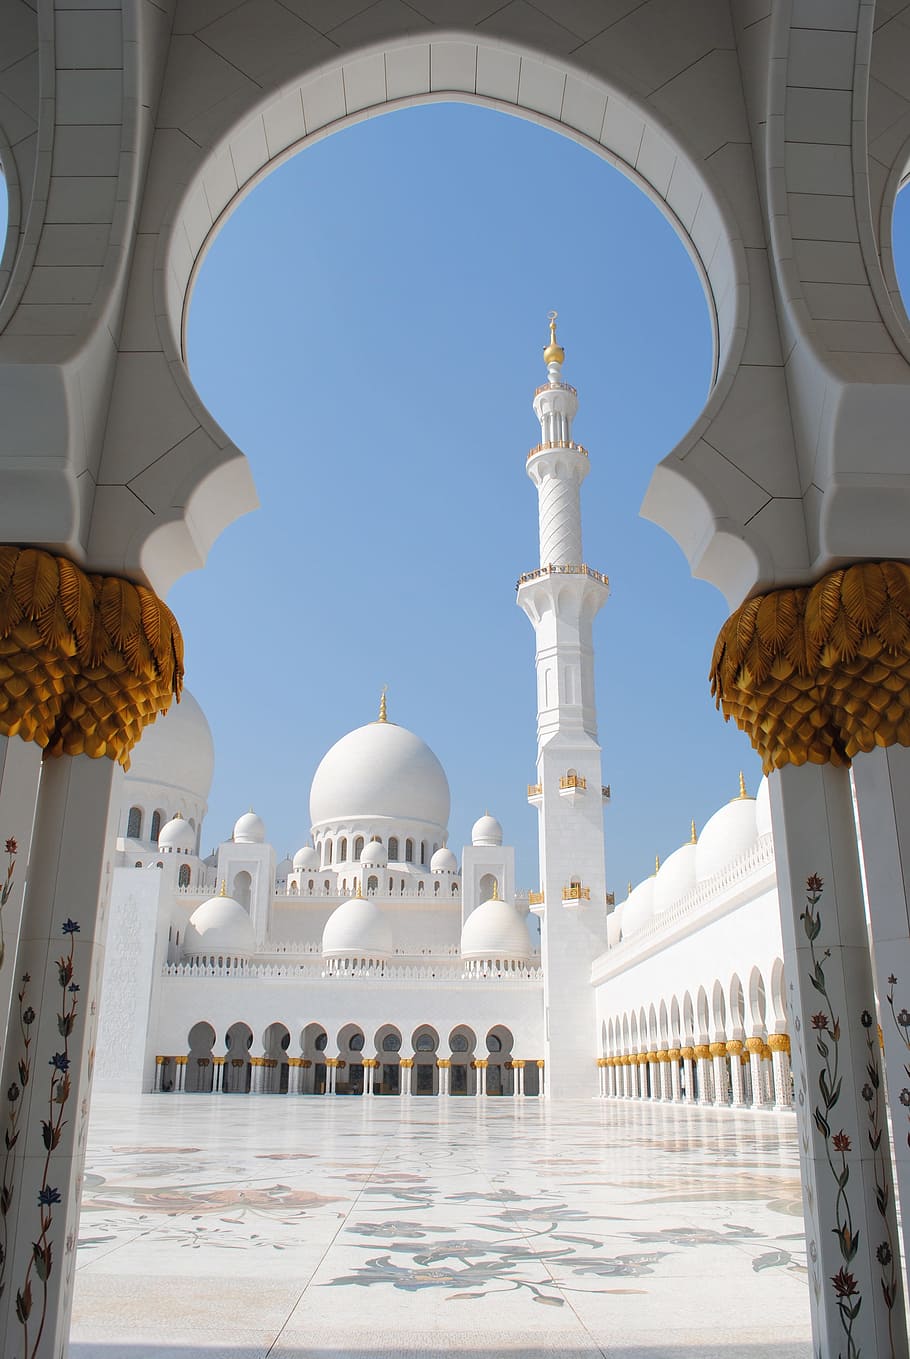 Abu Dhabi, White Mosque, mosque, emirates, orient, sheikh zayid mosque, islam, places of interest, dome, travel destinations